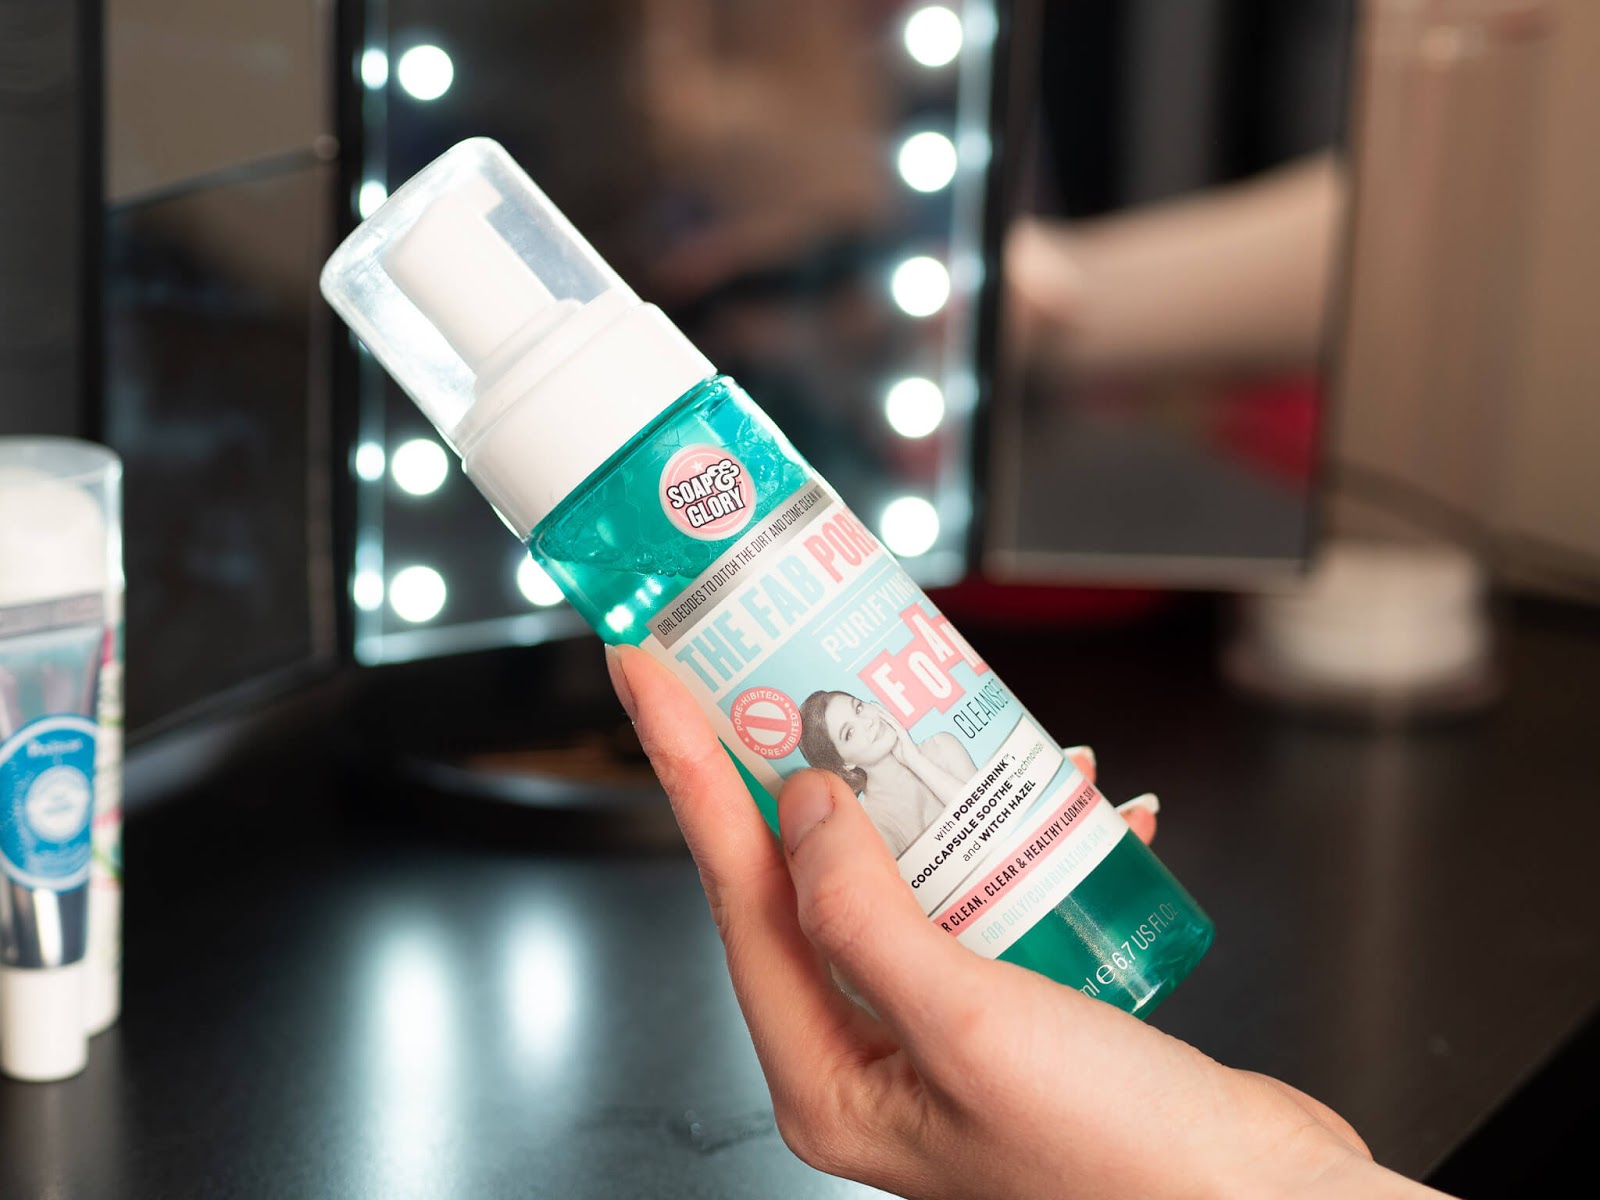 Soap & Glory's "The Fab Pore Purifying Foam Cleanser"